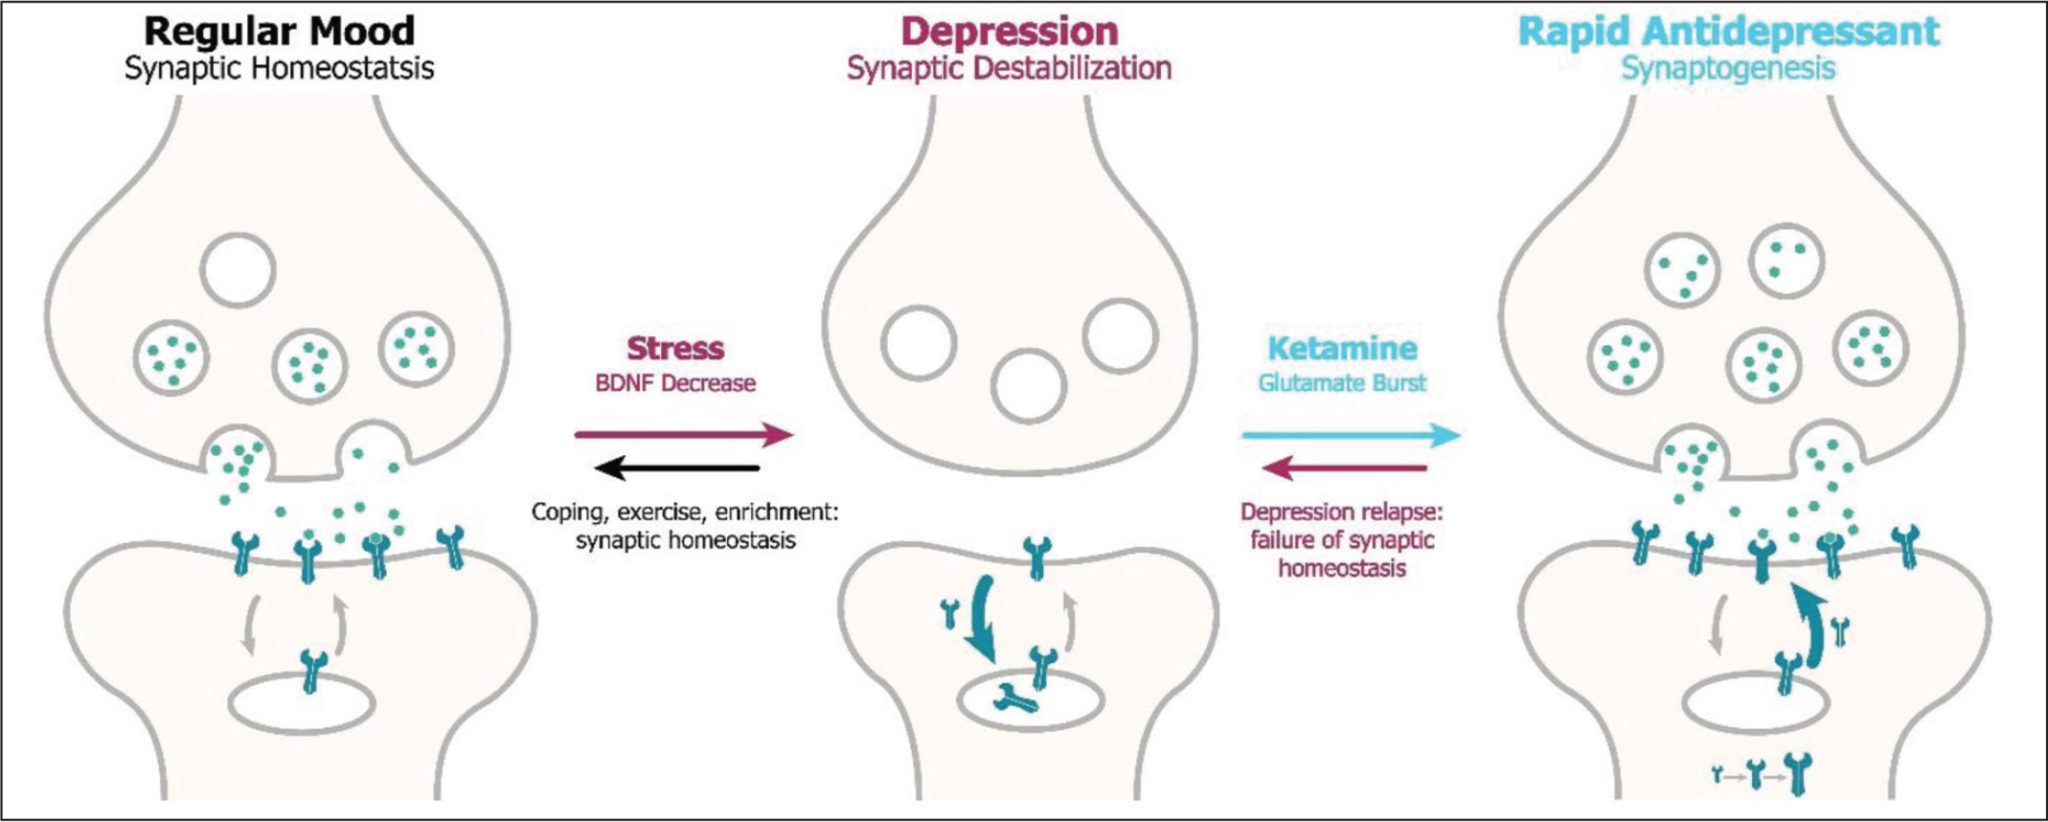 How-it-works-Ketamine-as-a-treatment-for-Depression-and-Pain